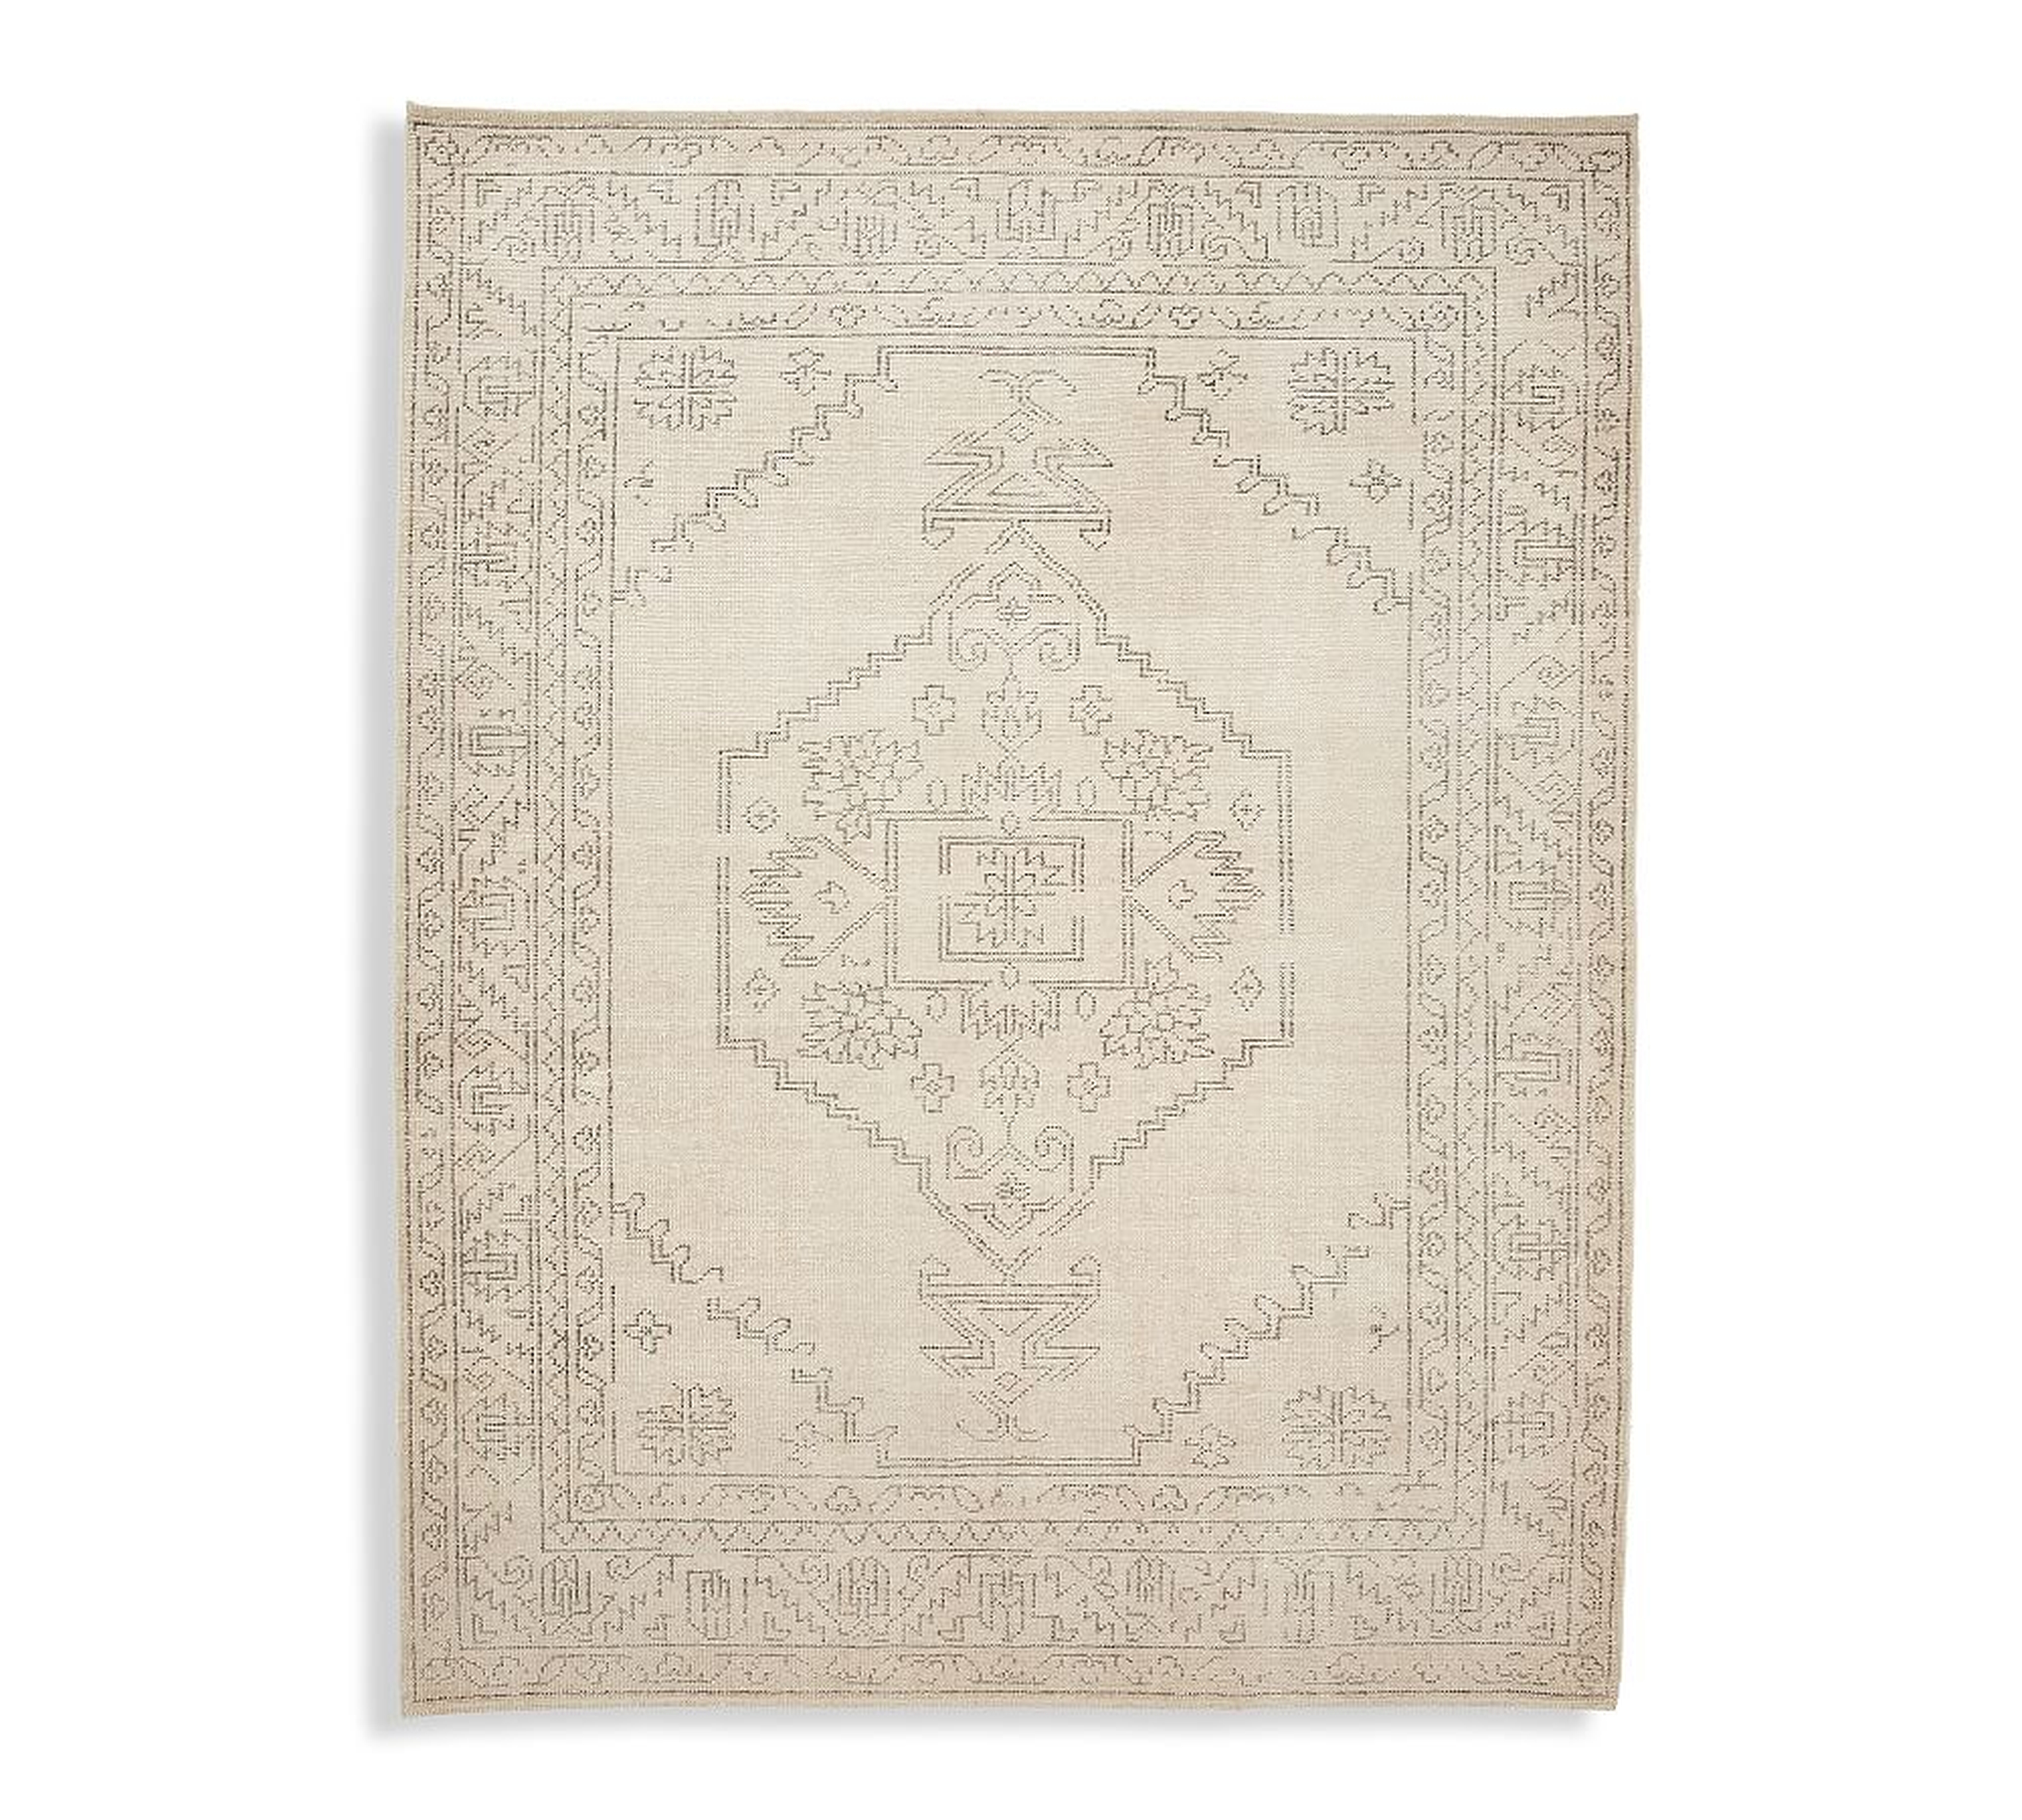 Emeline Handknotted Rug, 8 x 10', Charcoal Multi - Pottery Barn